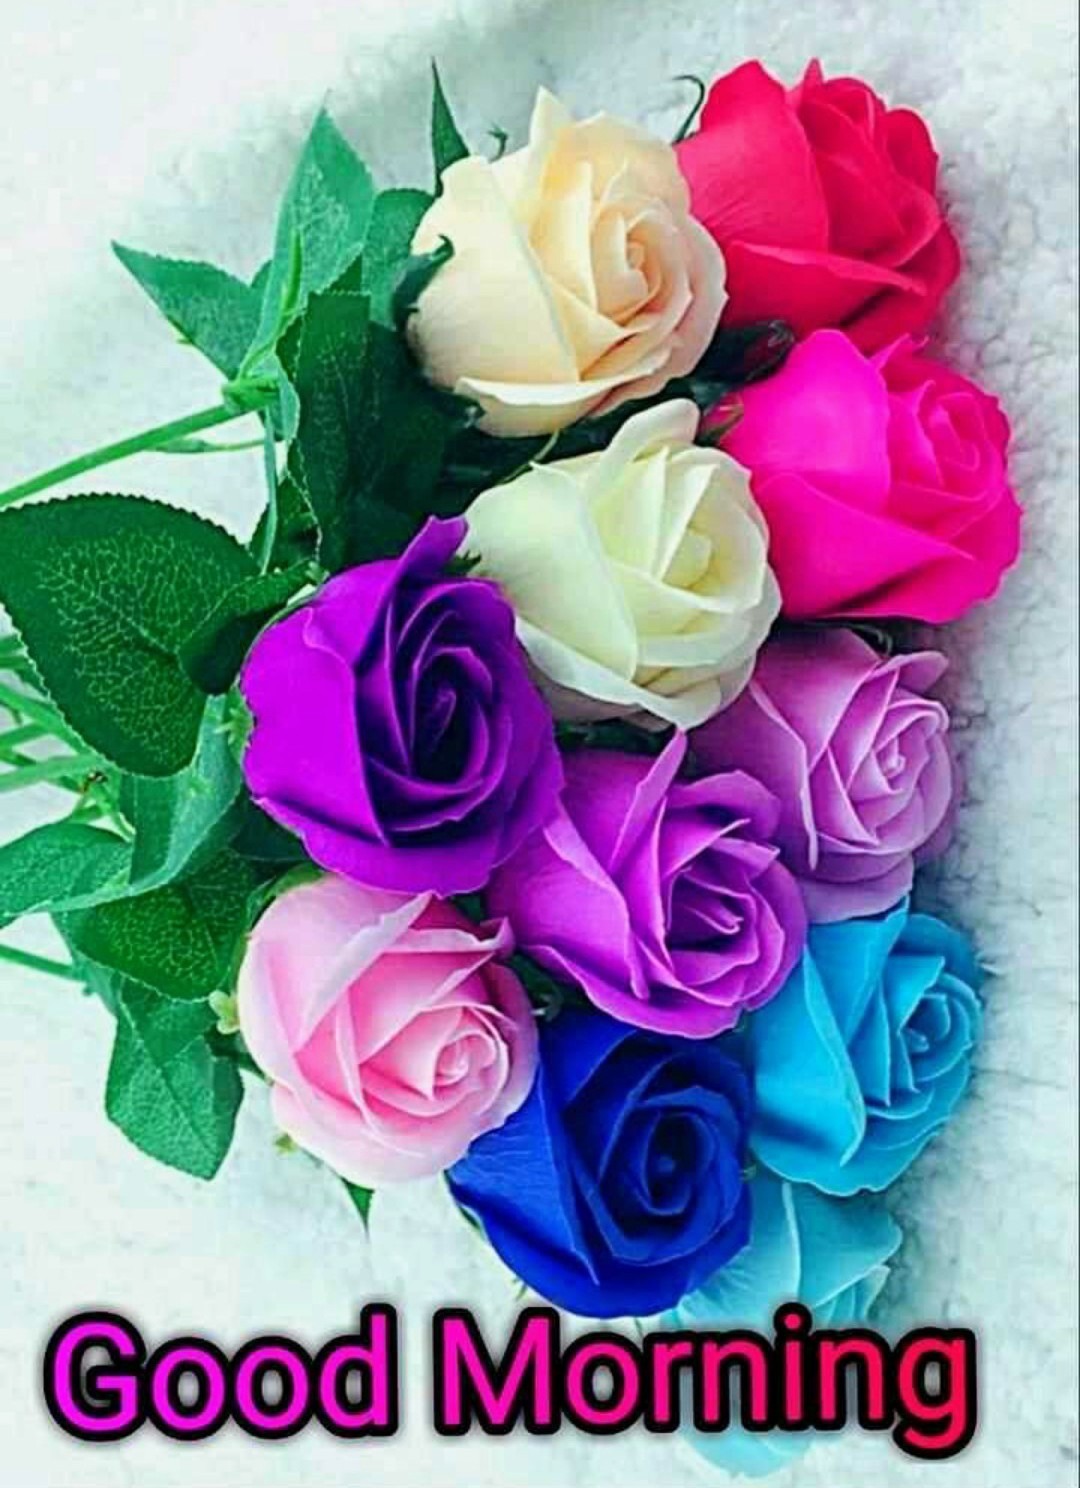 Good Morning With Colorful Roses - DesiComments.com